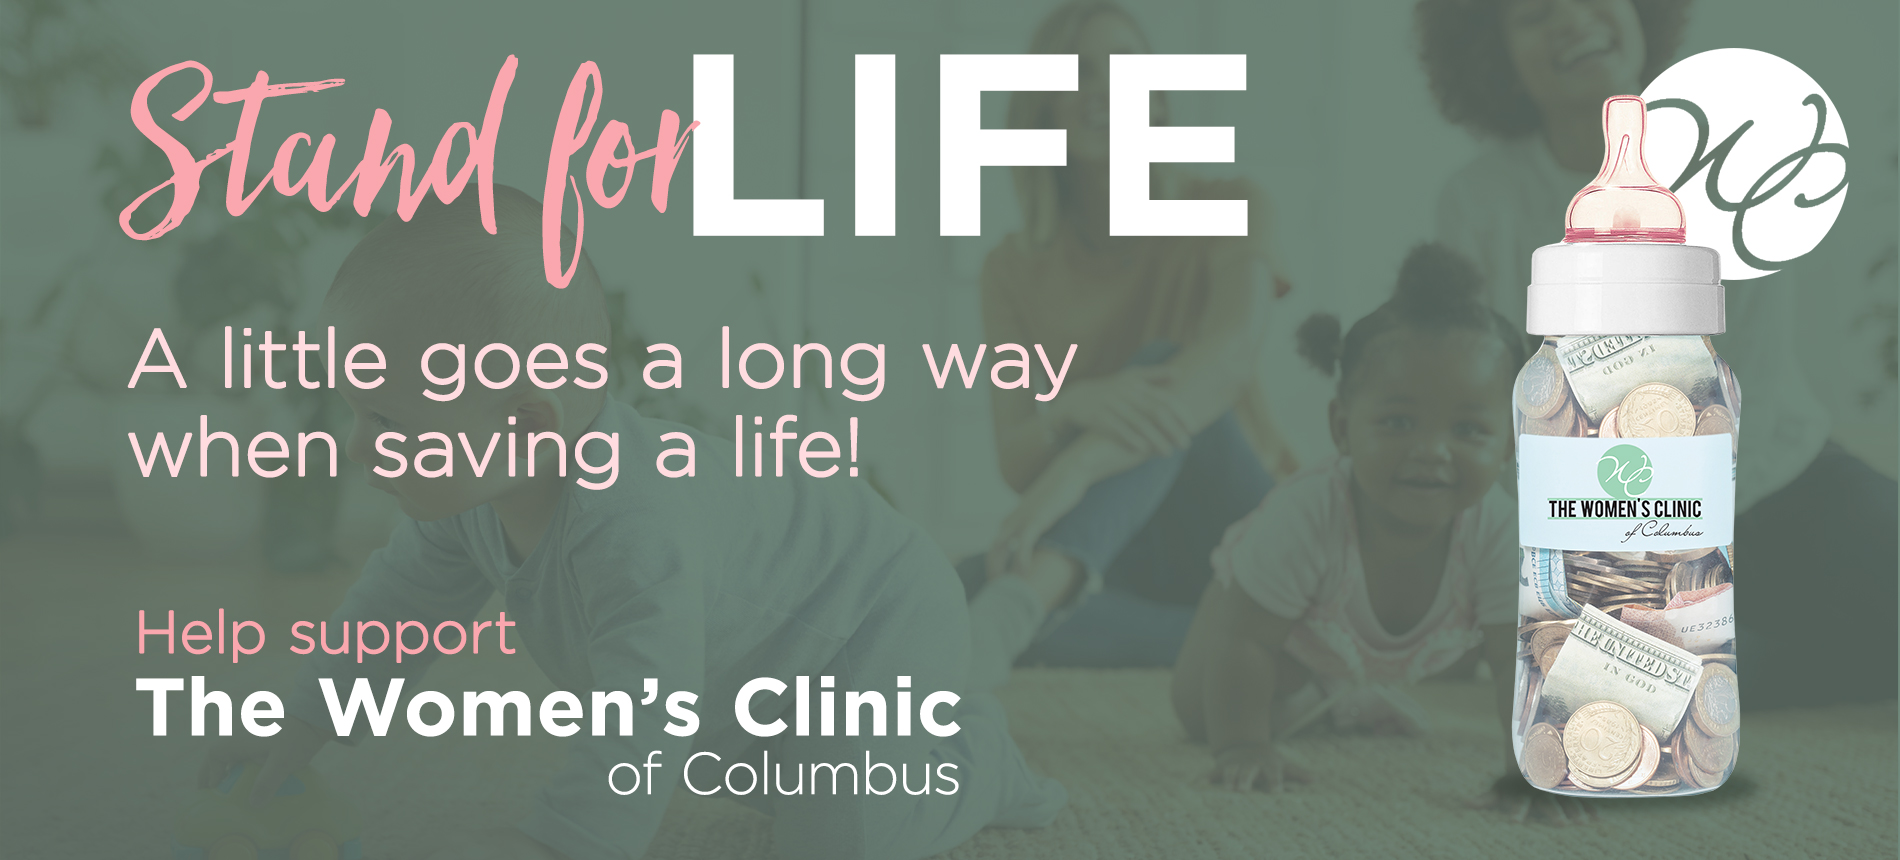 Stand For Life A little goes a long way when saving a life! Help support The Women's Clinic of Columbus